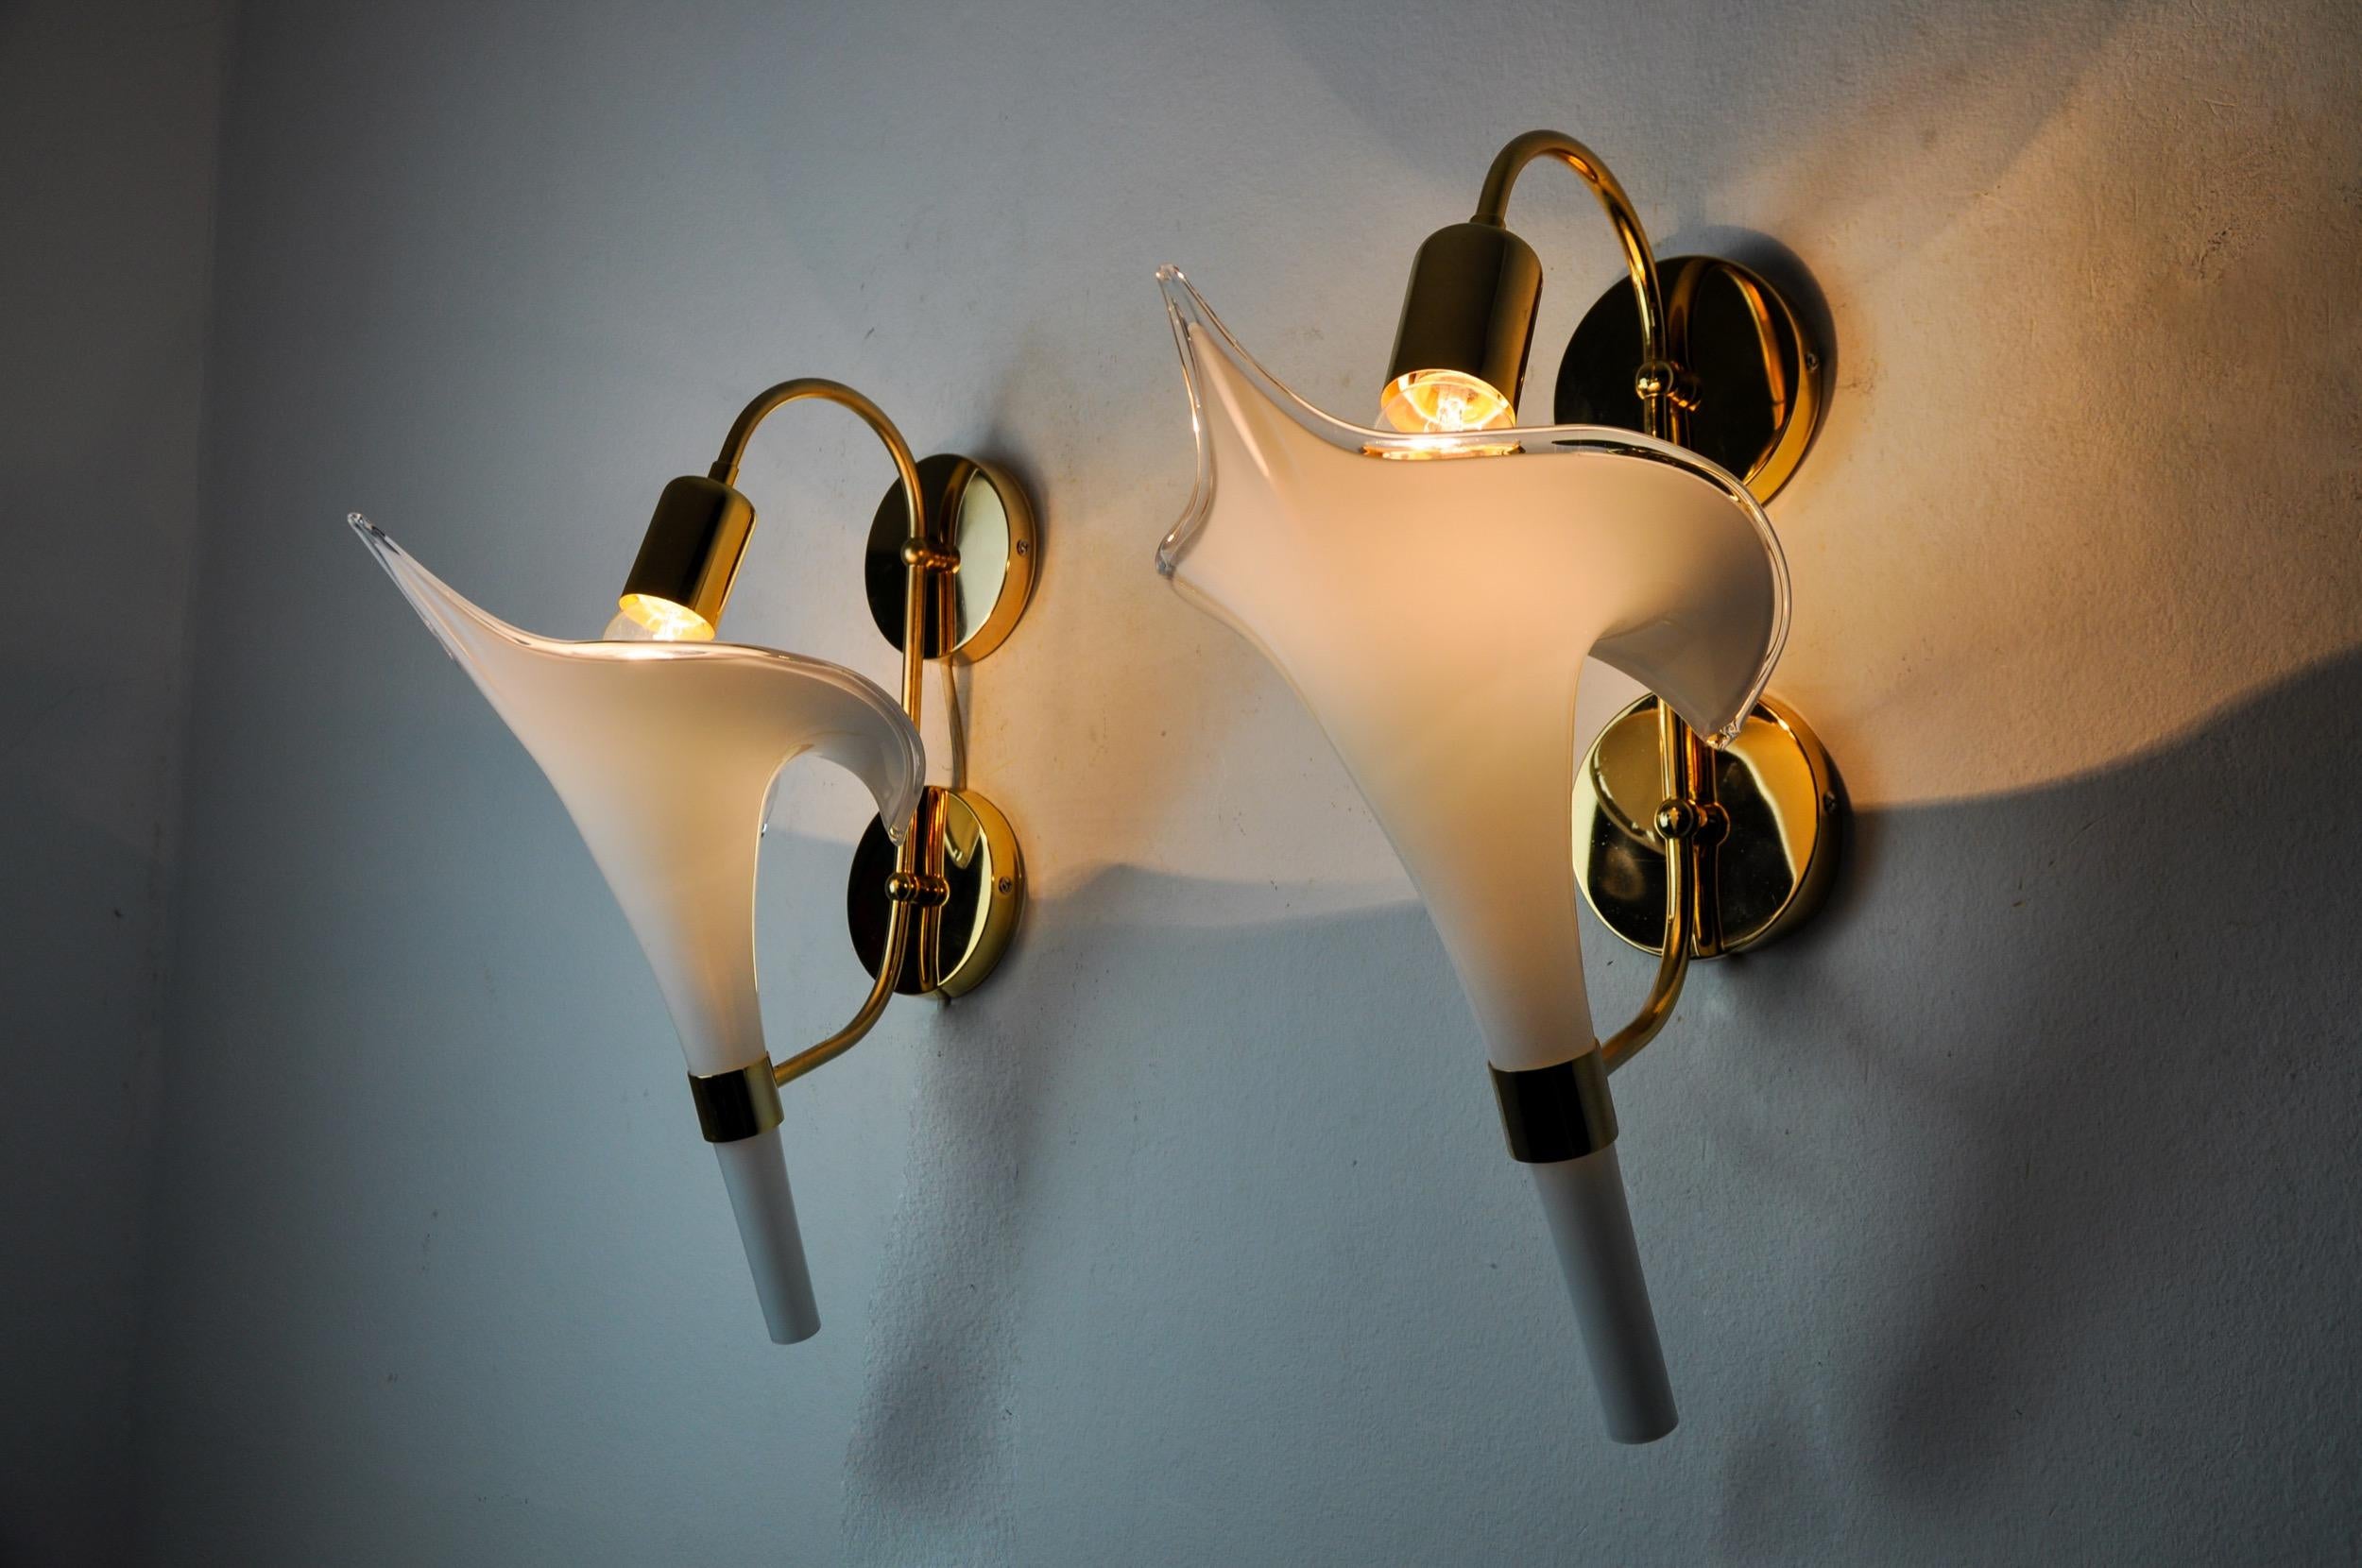 Superb and rare pair of fleur de lys wall lamps in murano glass, designed and produced in italy in the 1970s. Gilded metal structure composed of a white cut crystal in the shape of a fleur-de-lys, made by italian master glassmakers. Rare design